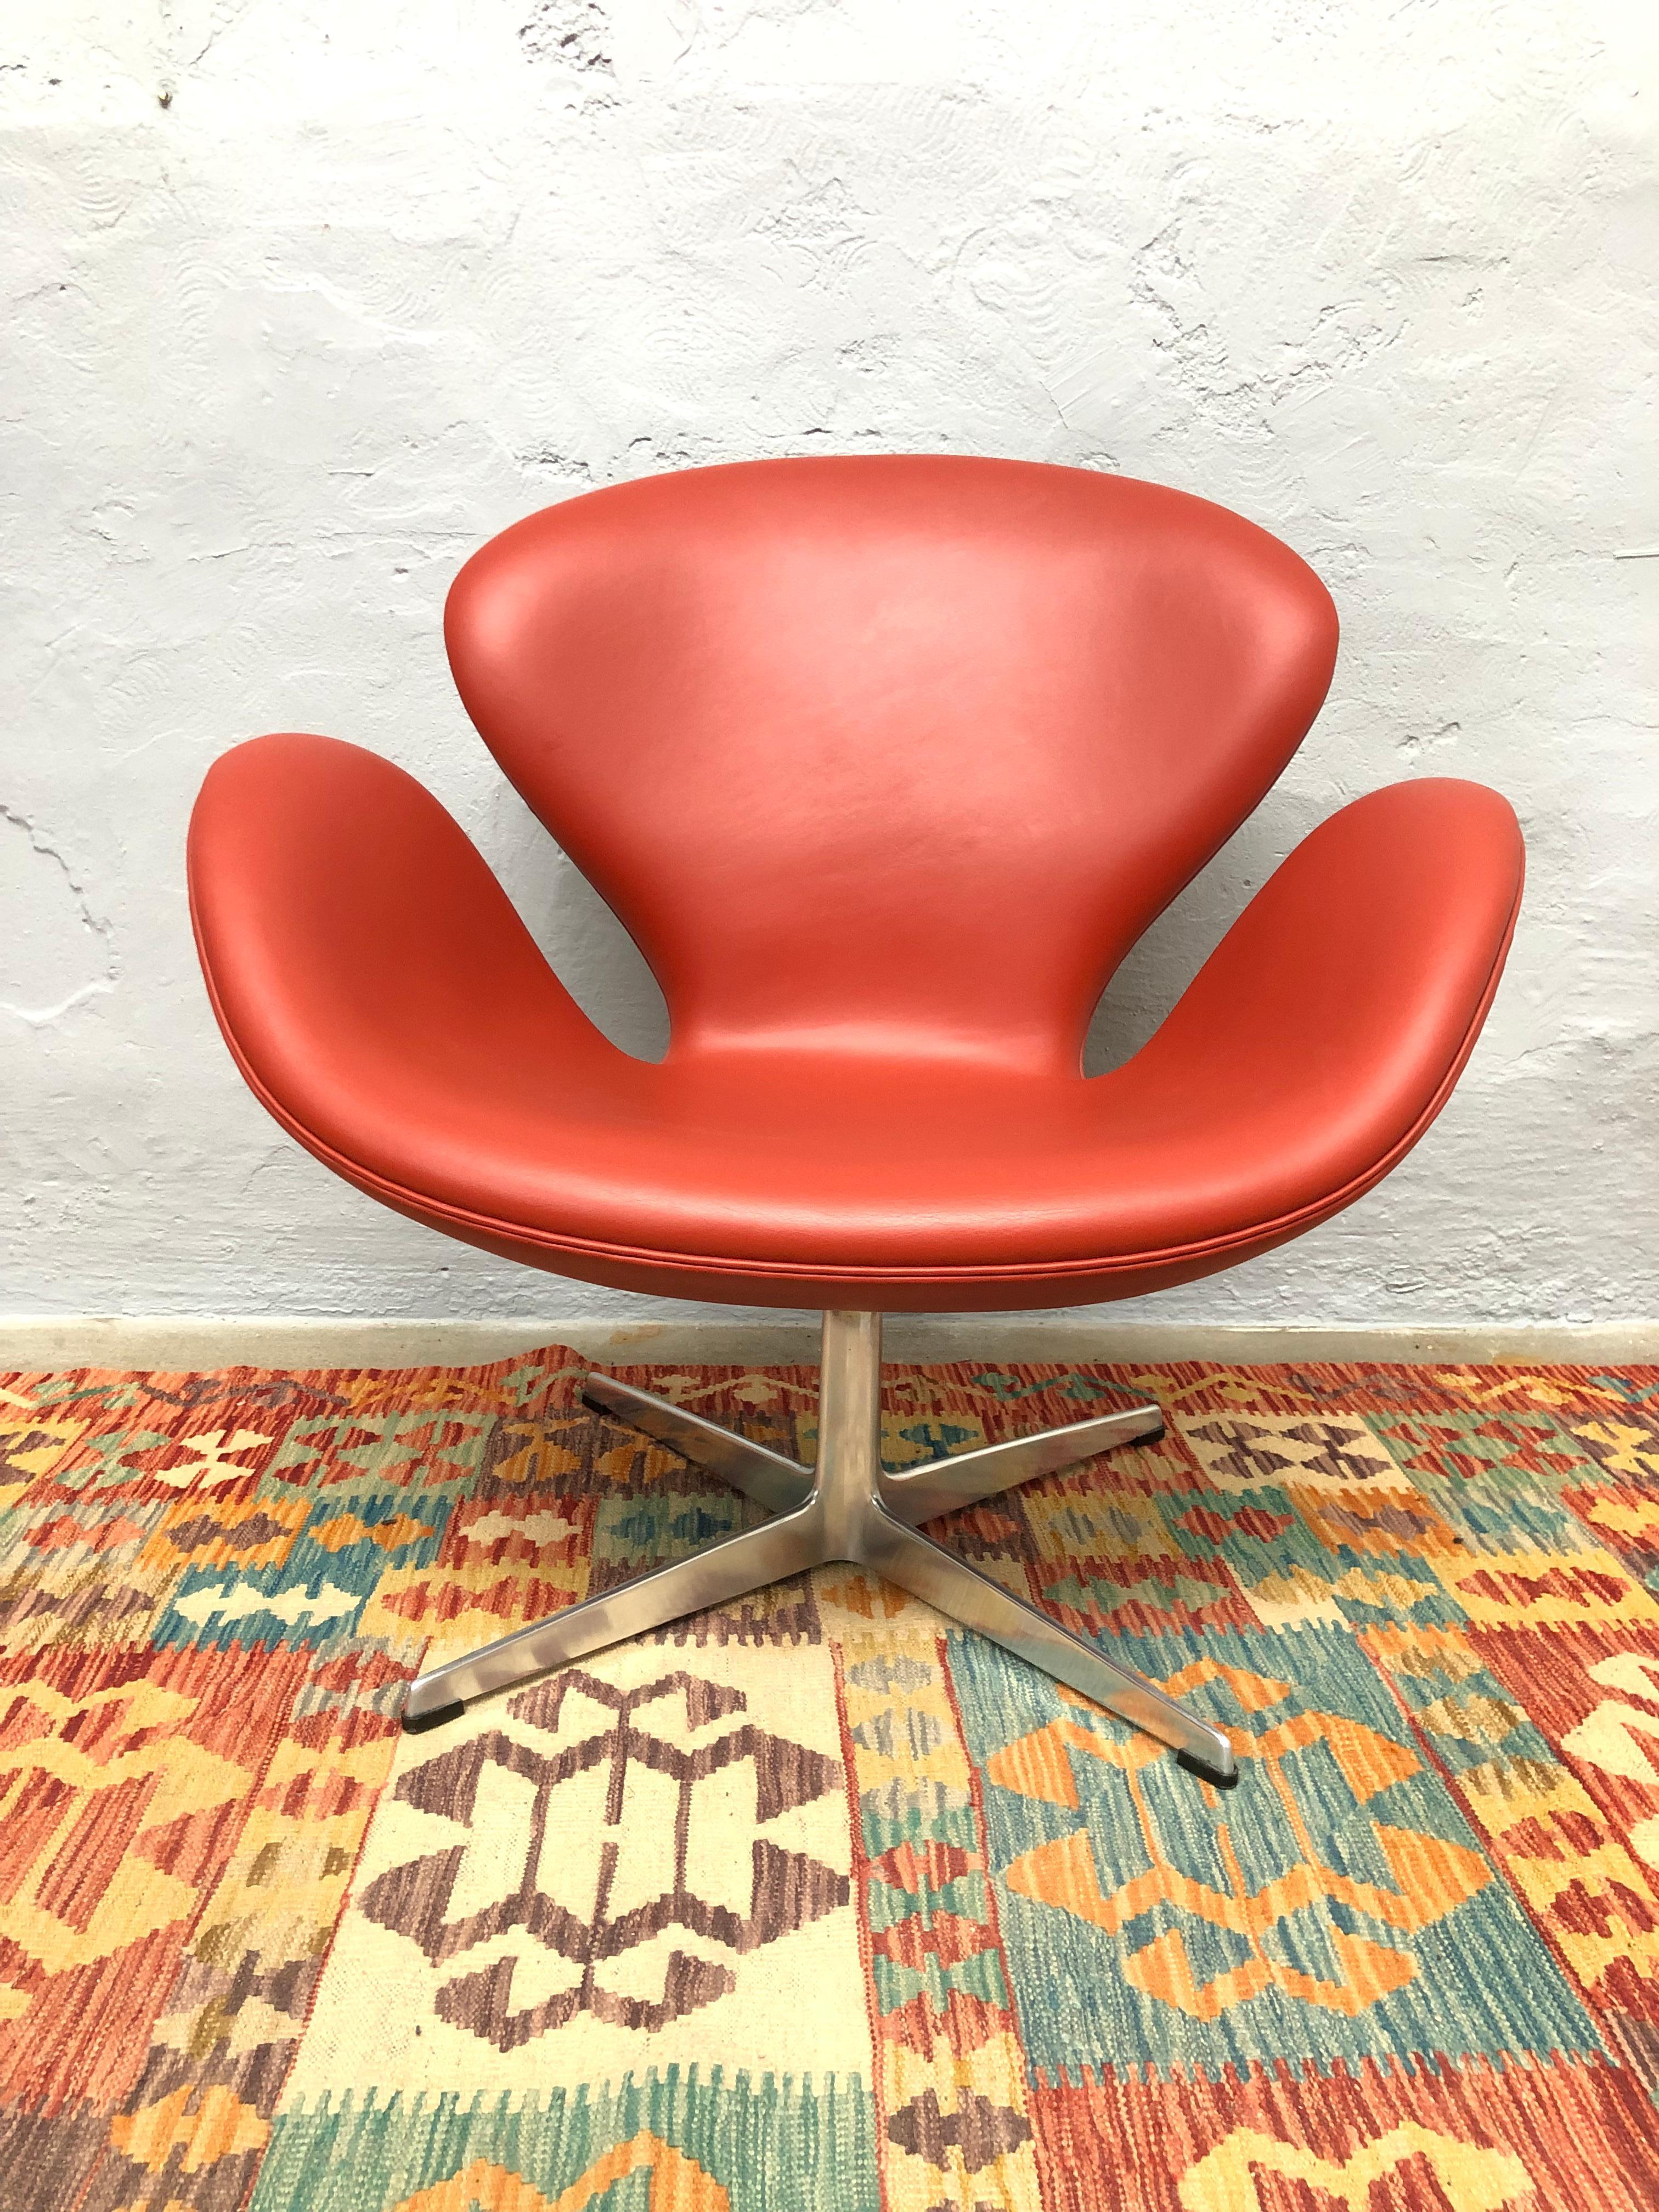 Vintage Iconic First Edition Arne Jacobsen 3320 Lounge Chair Designed in 1958 6